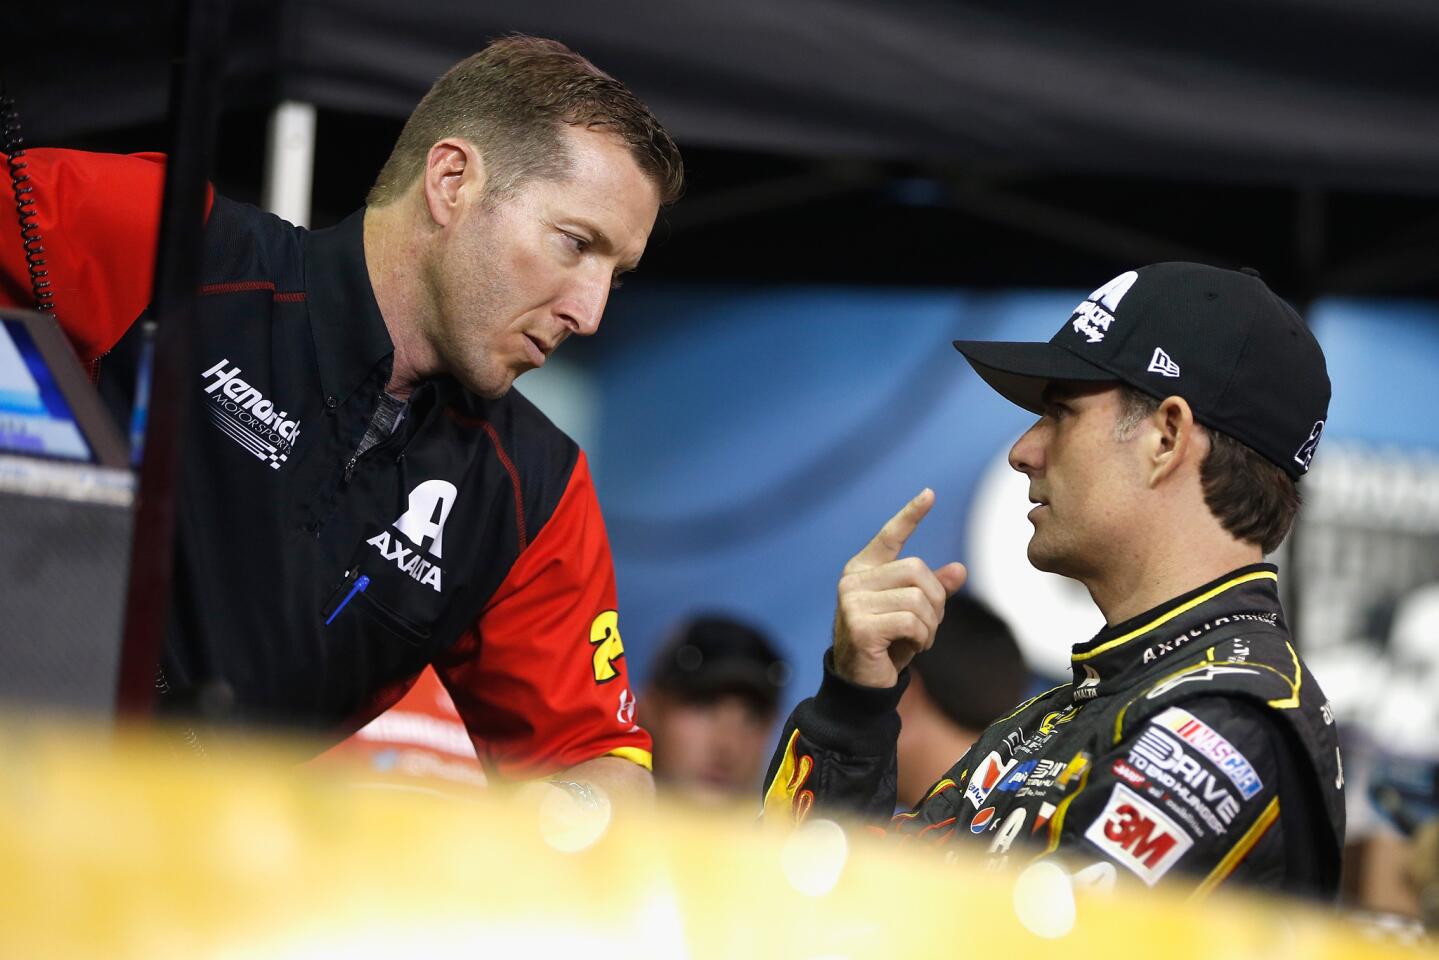 Jeff Gordon, driver of the #24 AXALTA Chevrolet, talks to crew chief Alan Gustafson during qualifying for the NASCAR Sprint Cup Series Ford EcoBoost 400 at Homestead-Miami Speedway on November 20, 2015 in Homestead, Florida.